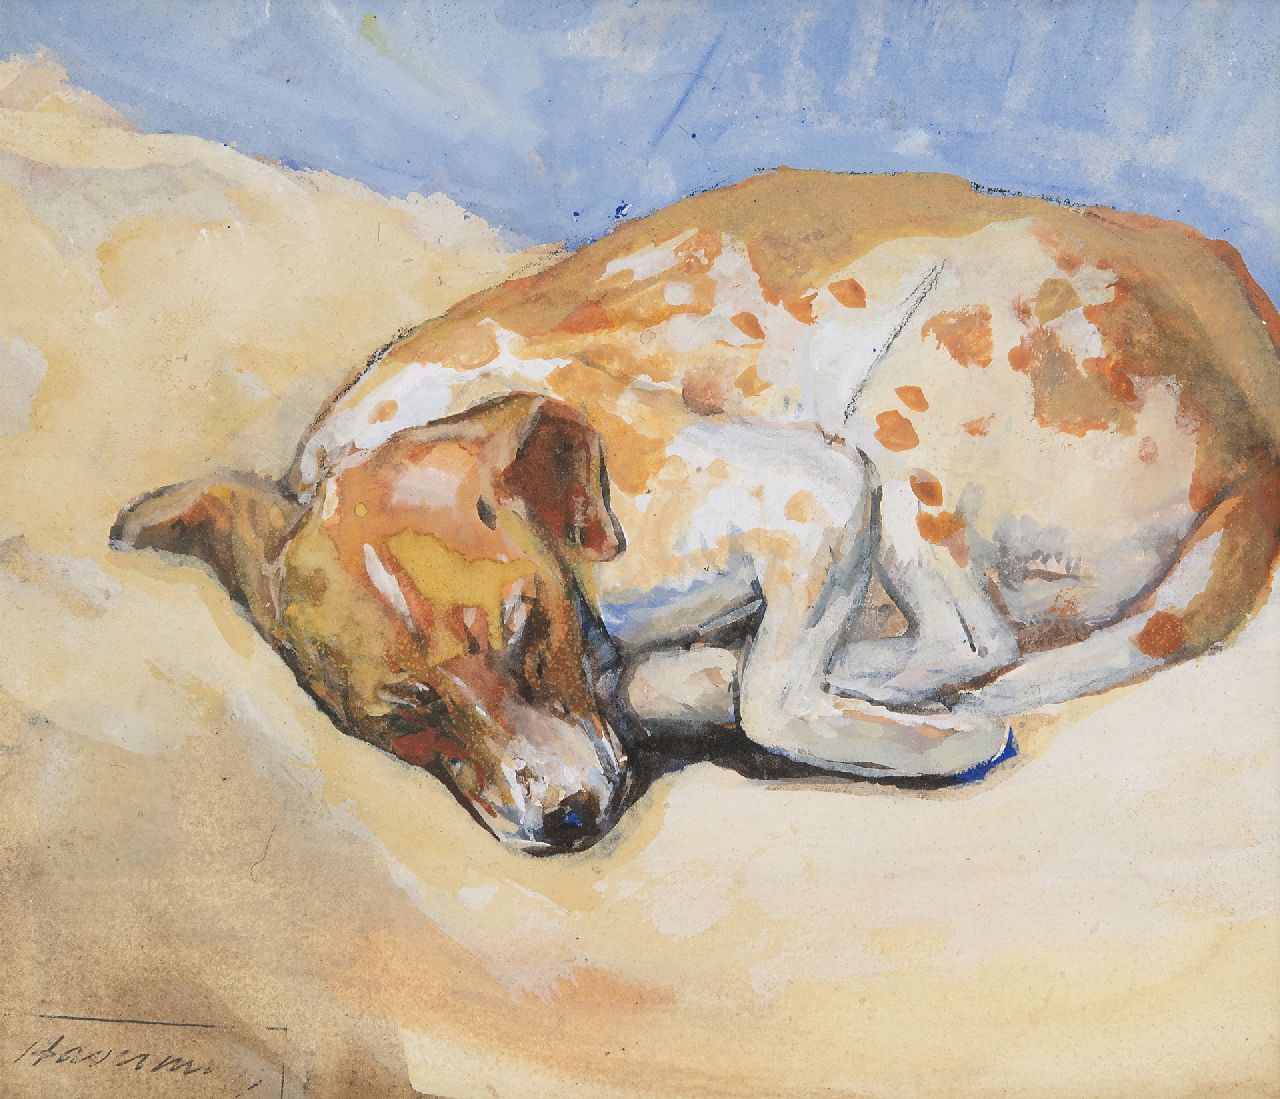 Haverman H.J.  | Hendrik Johannes Haverman | Watercolours and drawings offered for sale | Sleeping dog, watercolour and gouache on paper 15.7 x 18.4 cm, signed l.l. with studio stamp